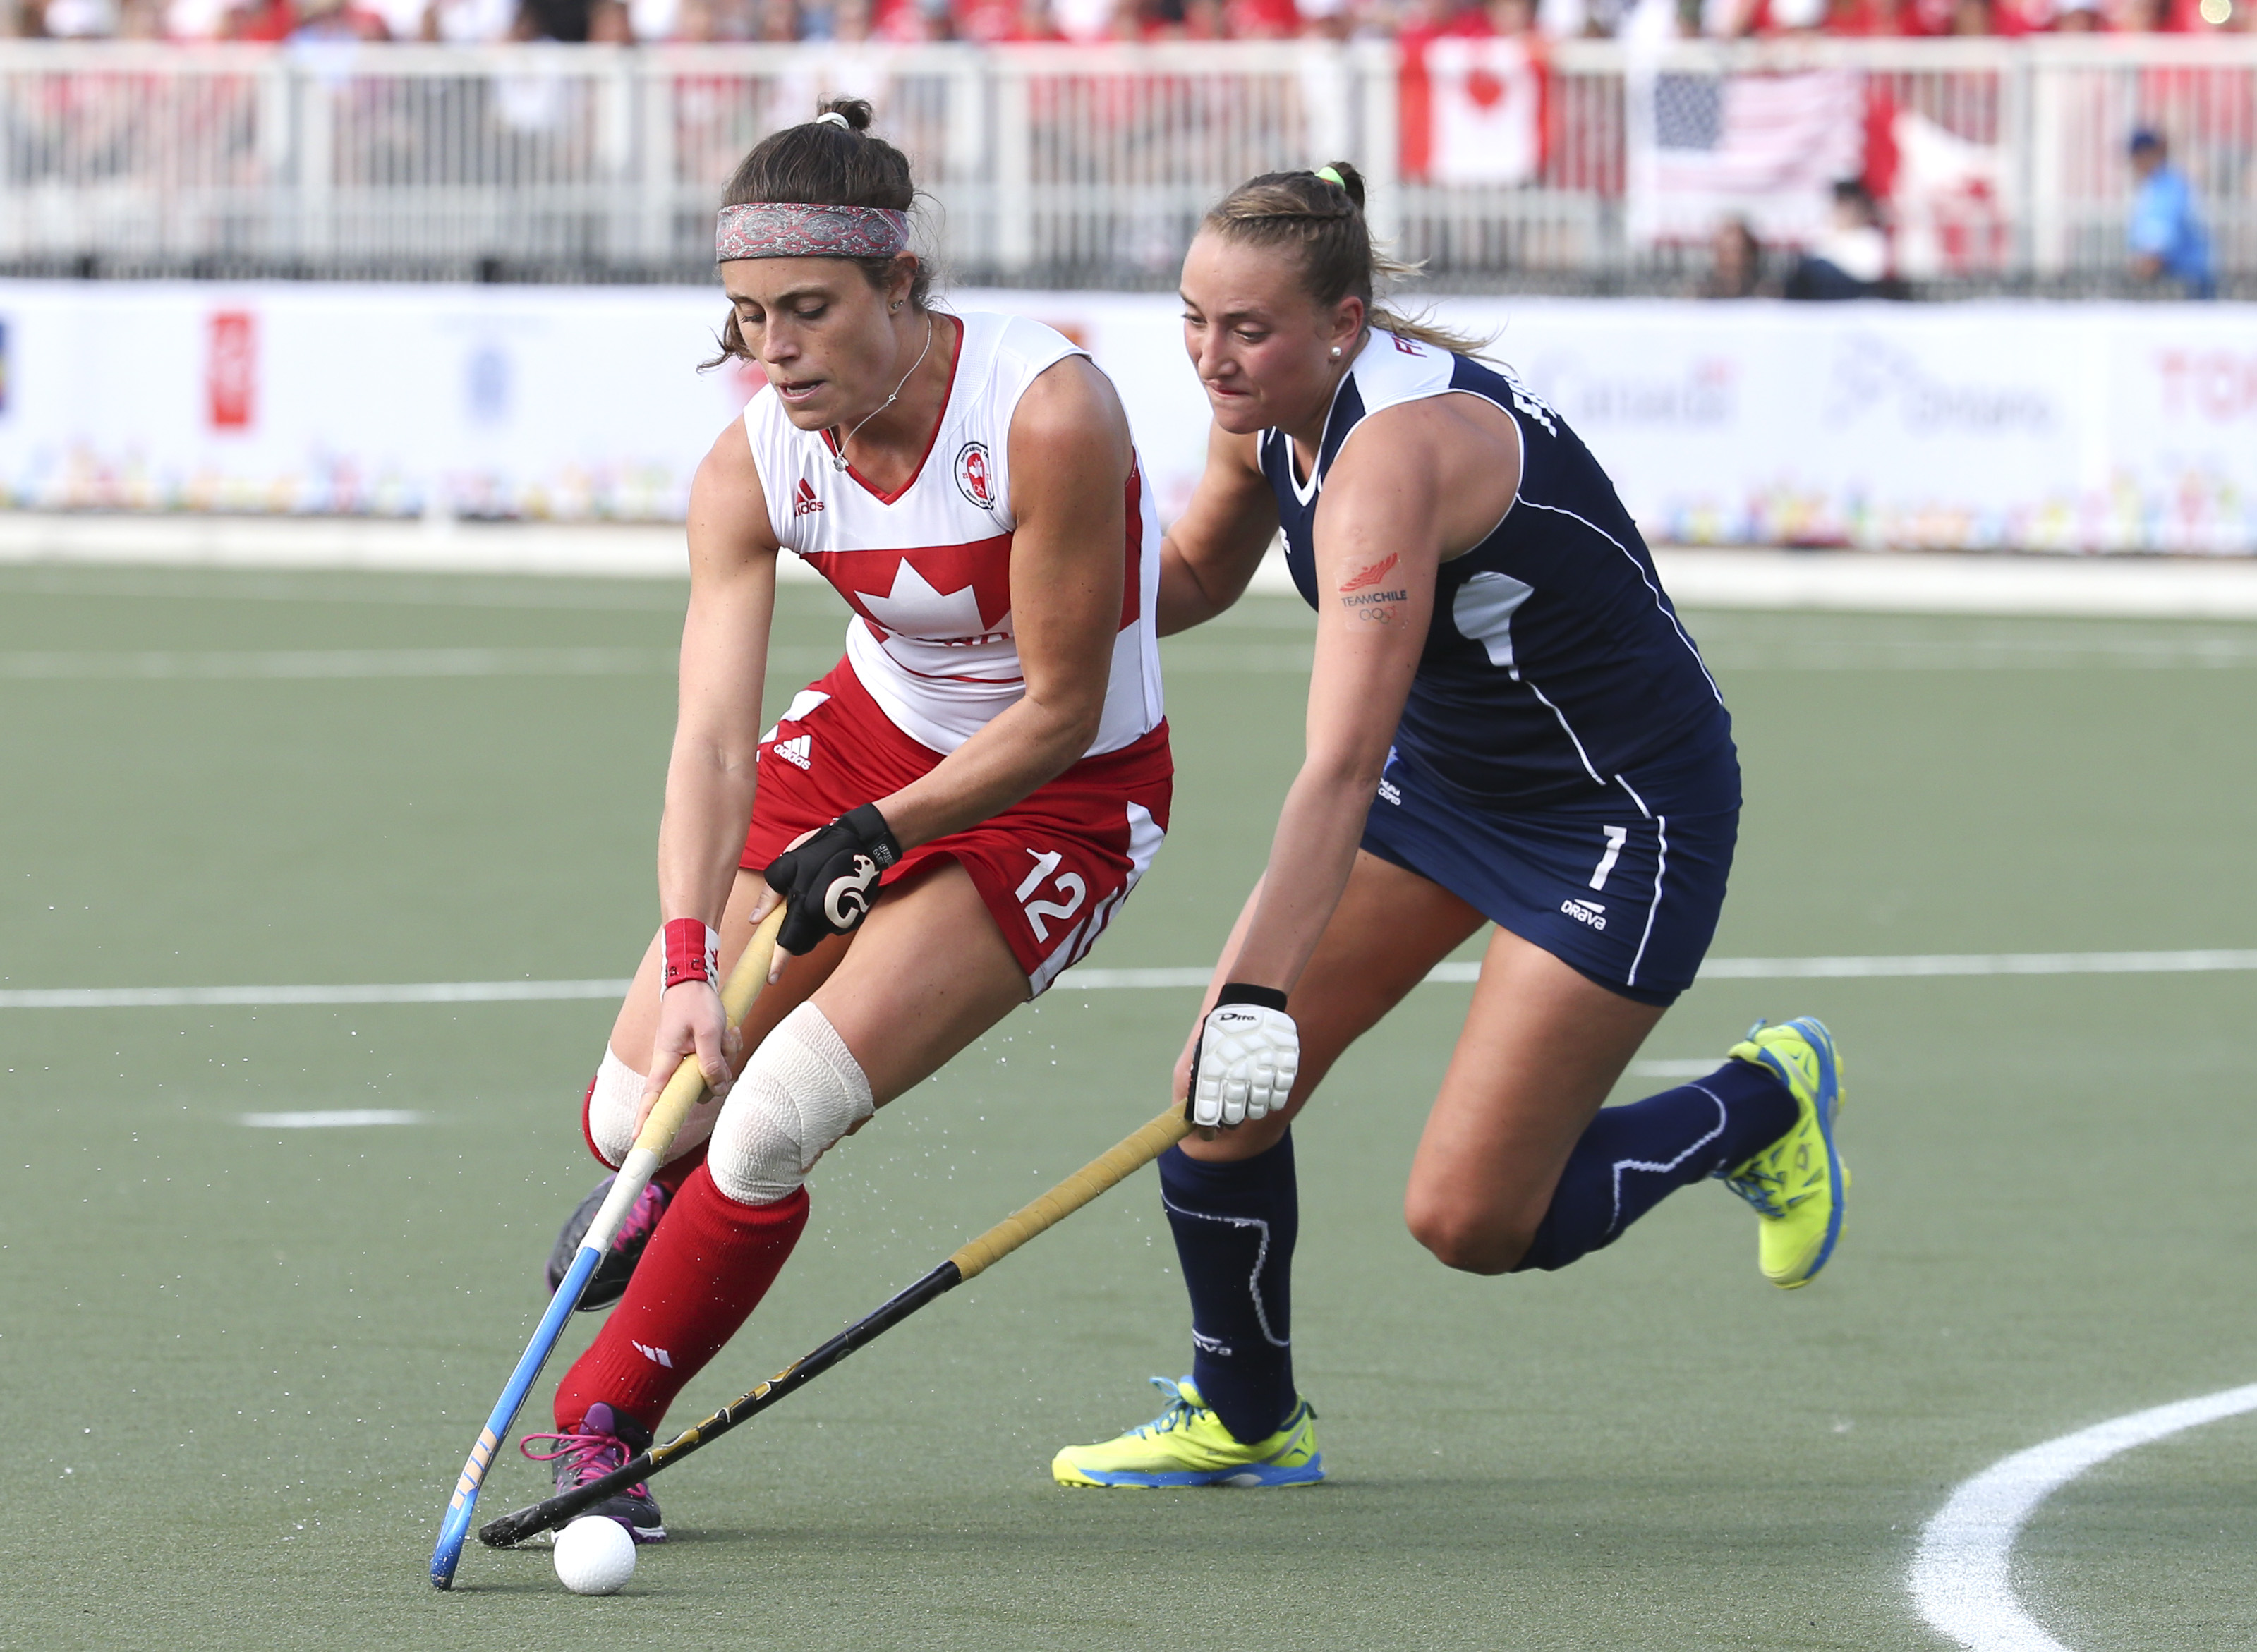 Thea Culley competes at the 2015 Pan American Games